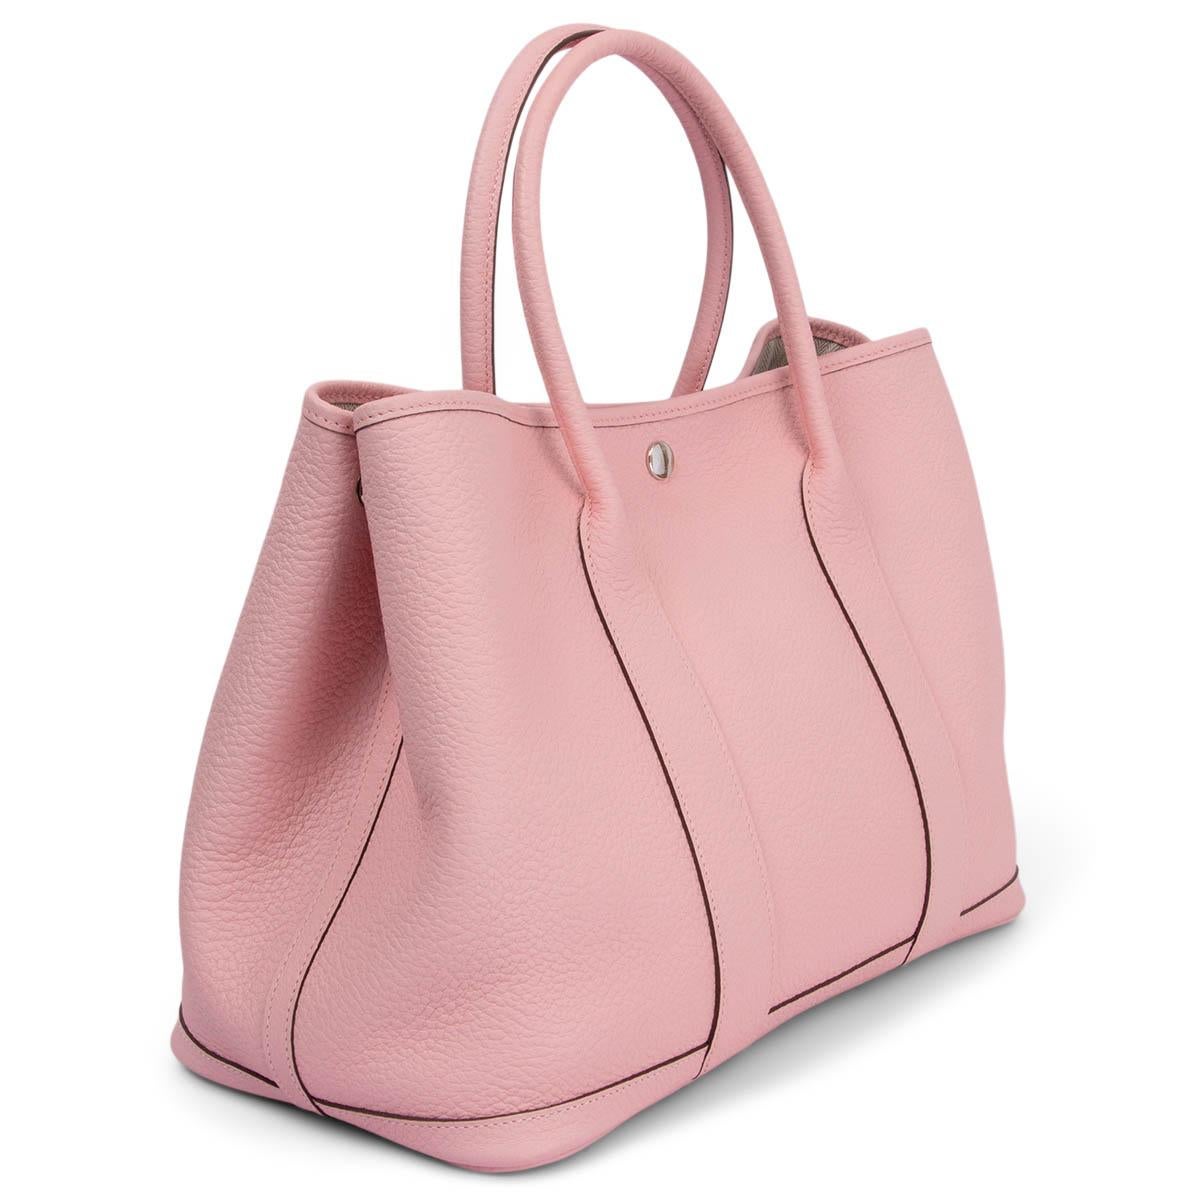 100% authentic Hermès Garden Party 36 in Rose Sakura pink Vache Country leather. Cloeses with a Palladium snap fastening and has two side press-stud fastening. Lined in off-white chevron canvas with an internal zip pocket. Brand new - comes with